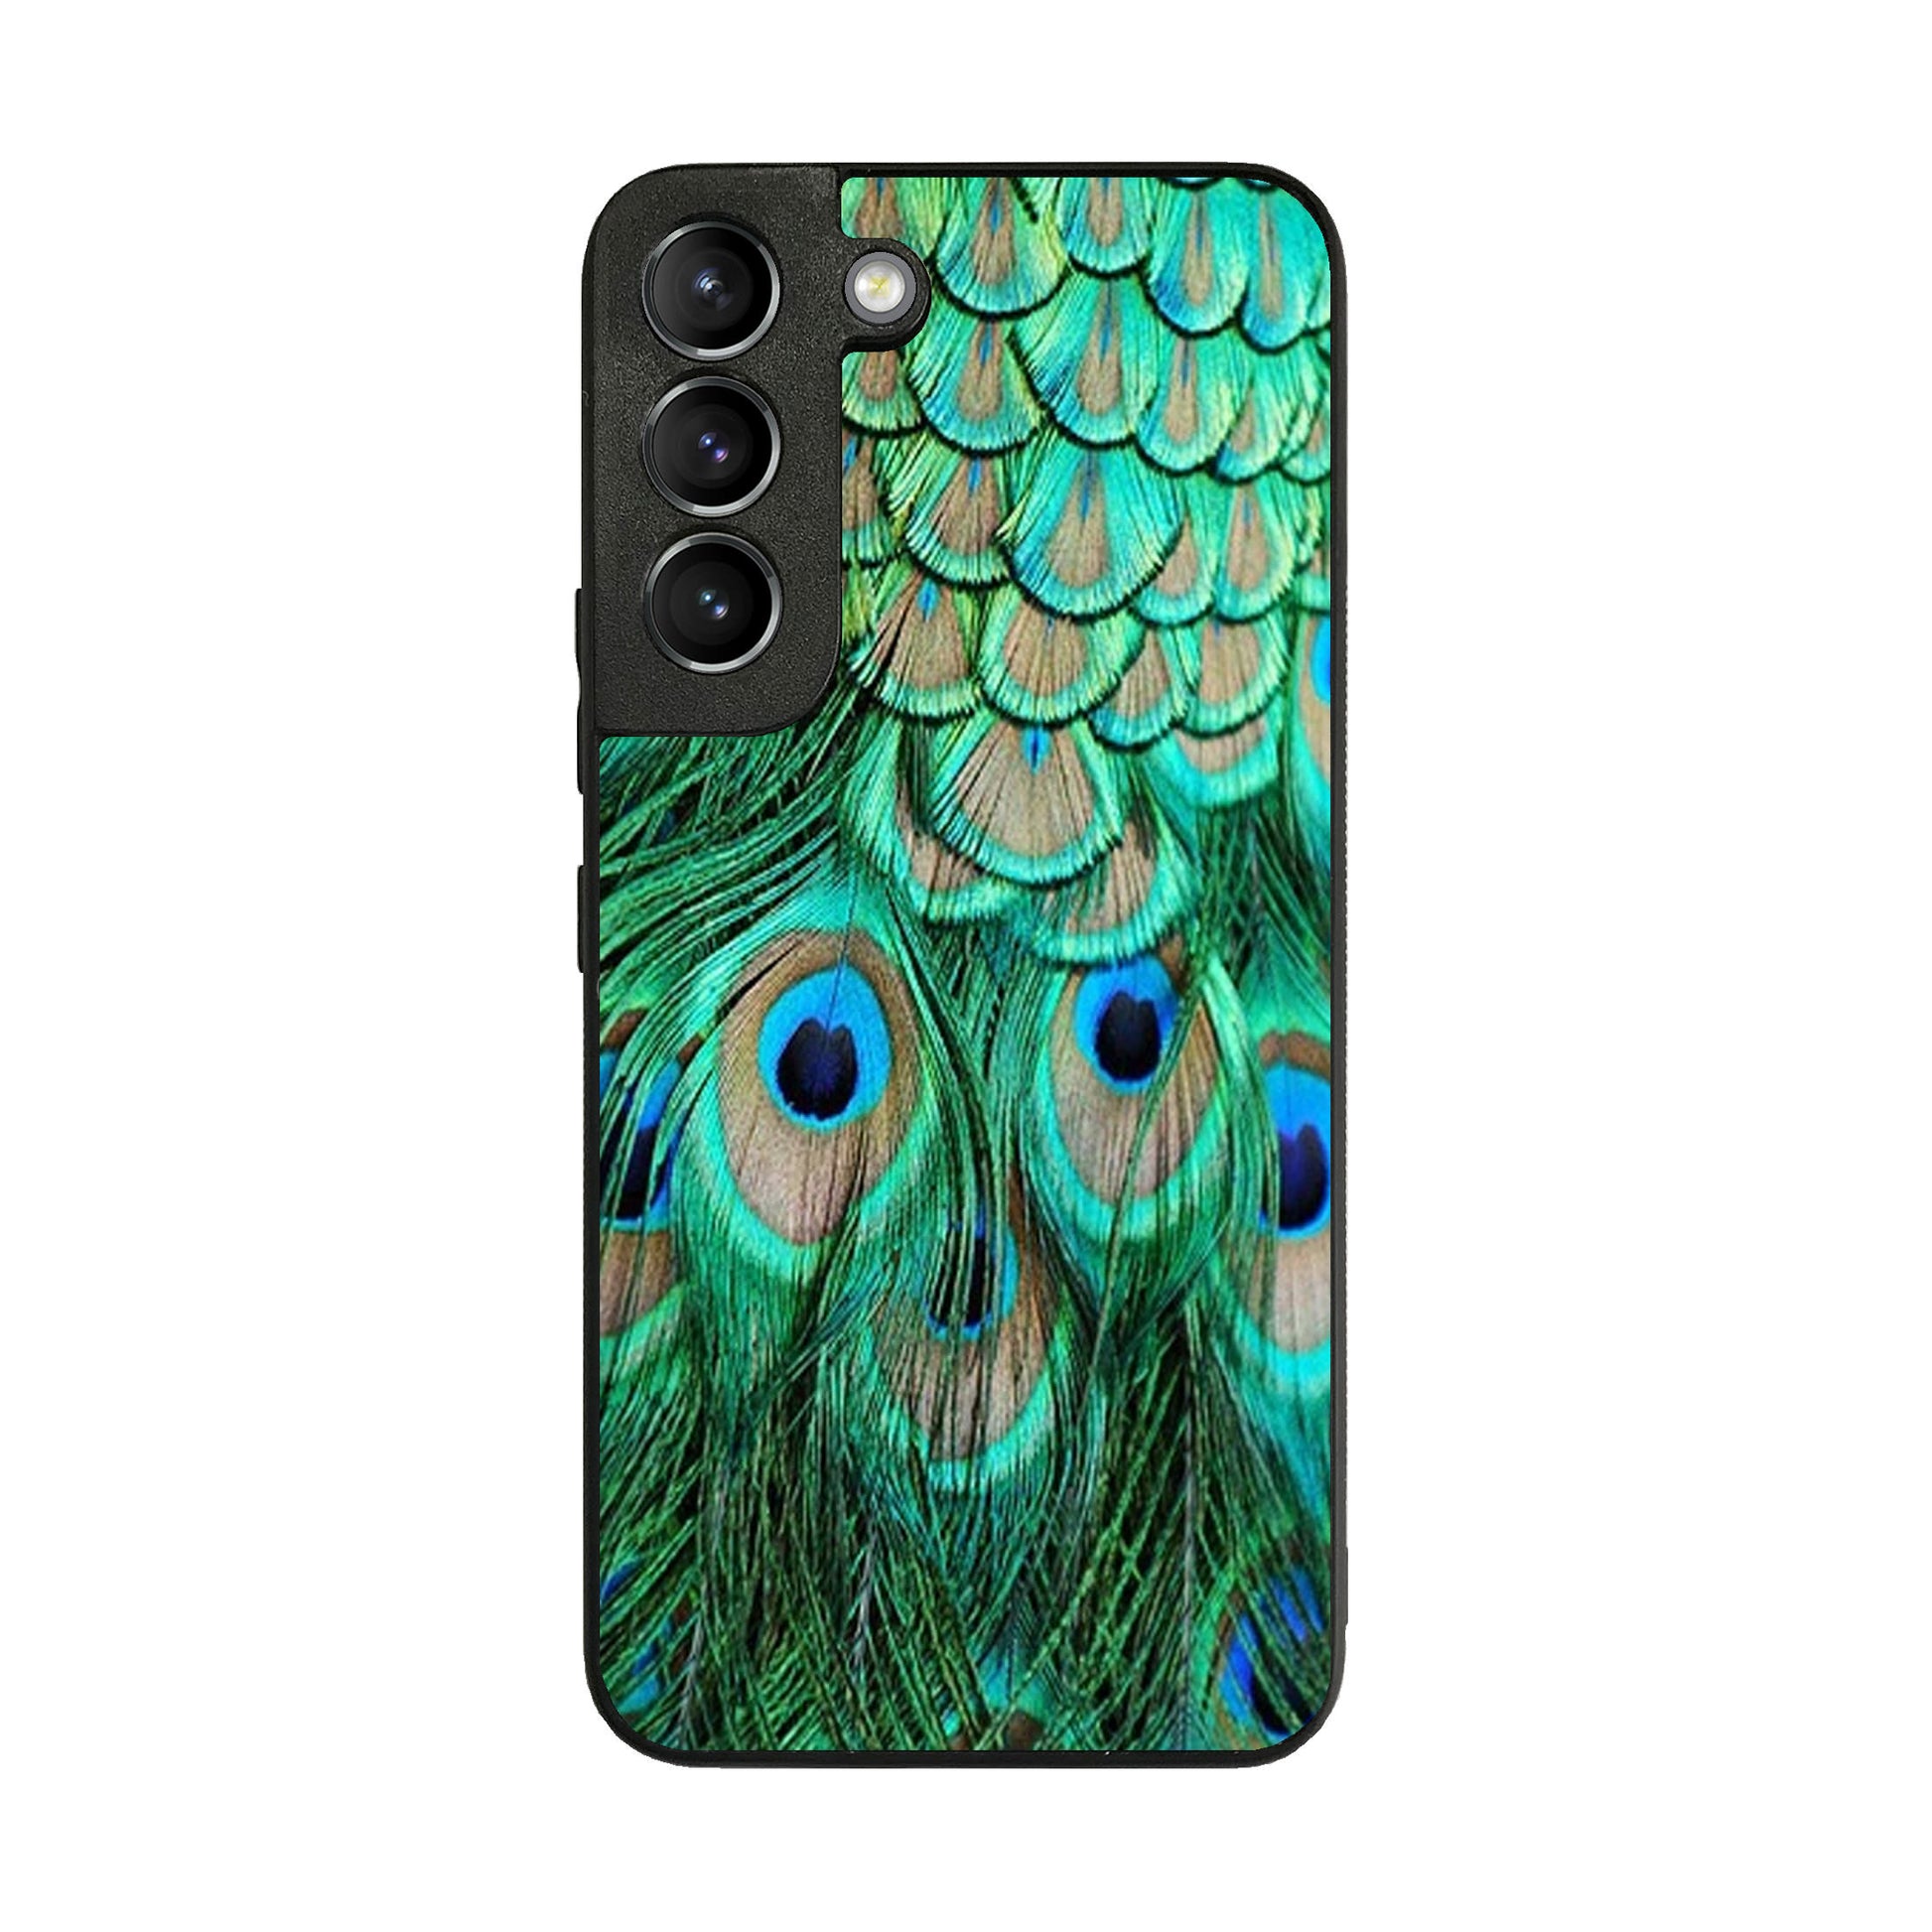 Peacock Feather Galaxy S22 / S22 Plus Case